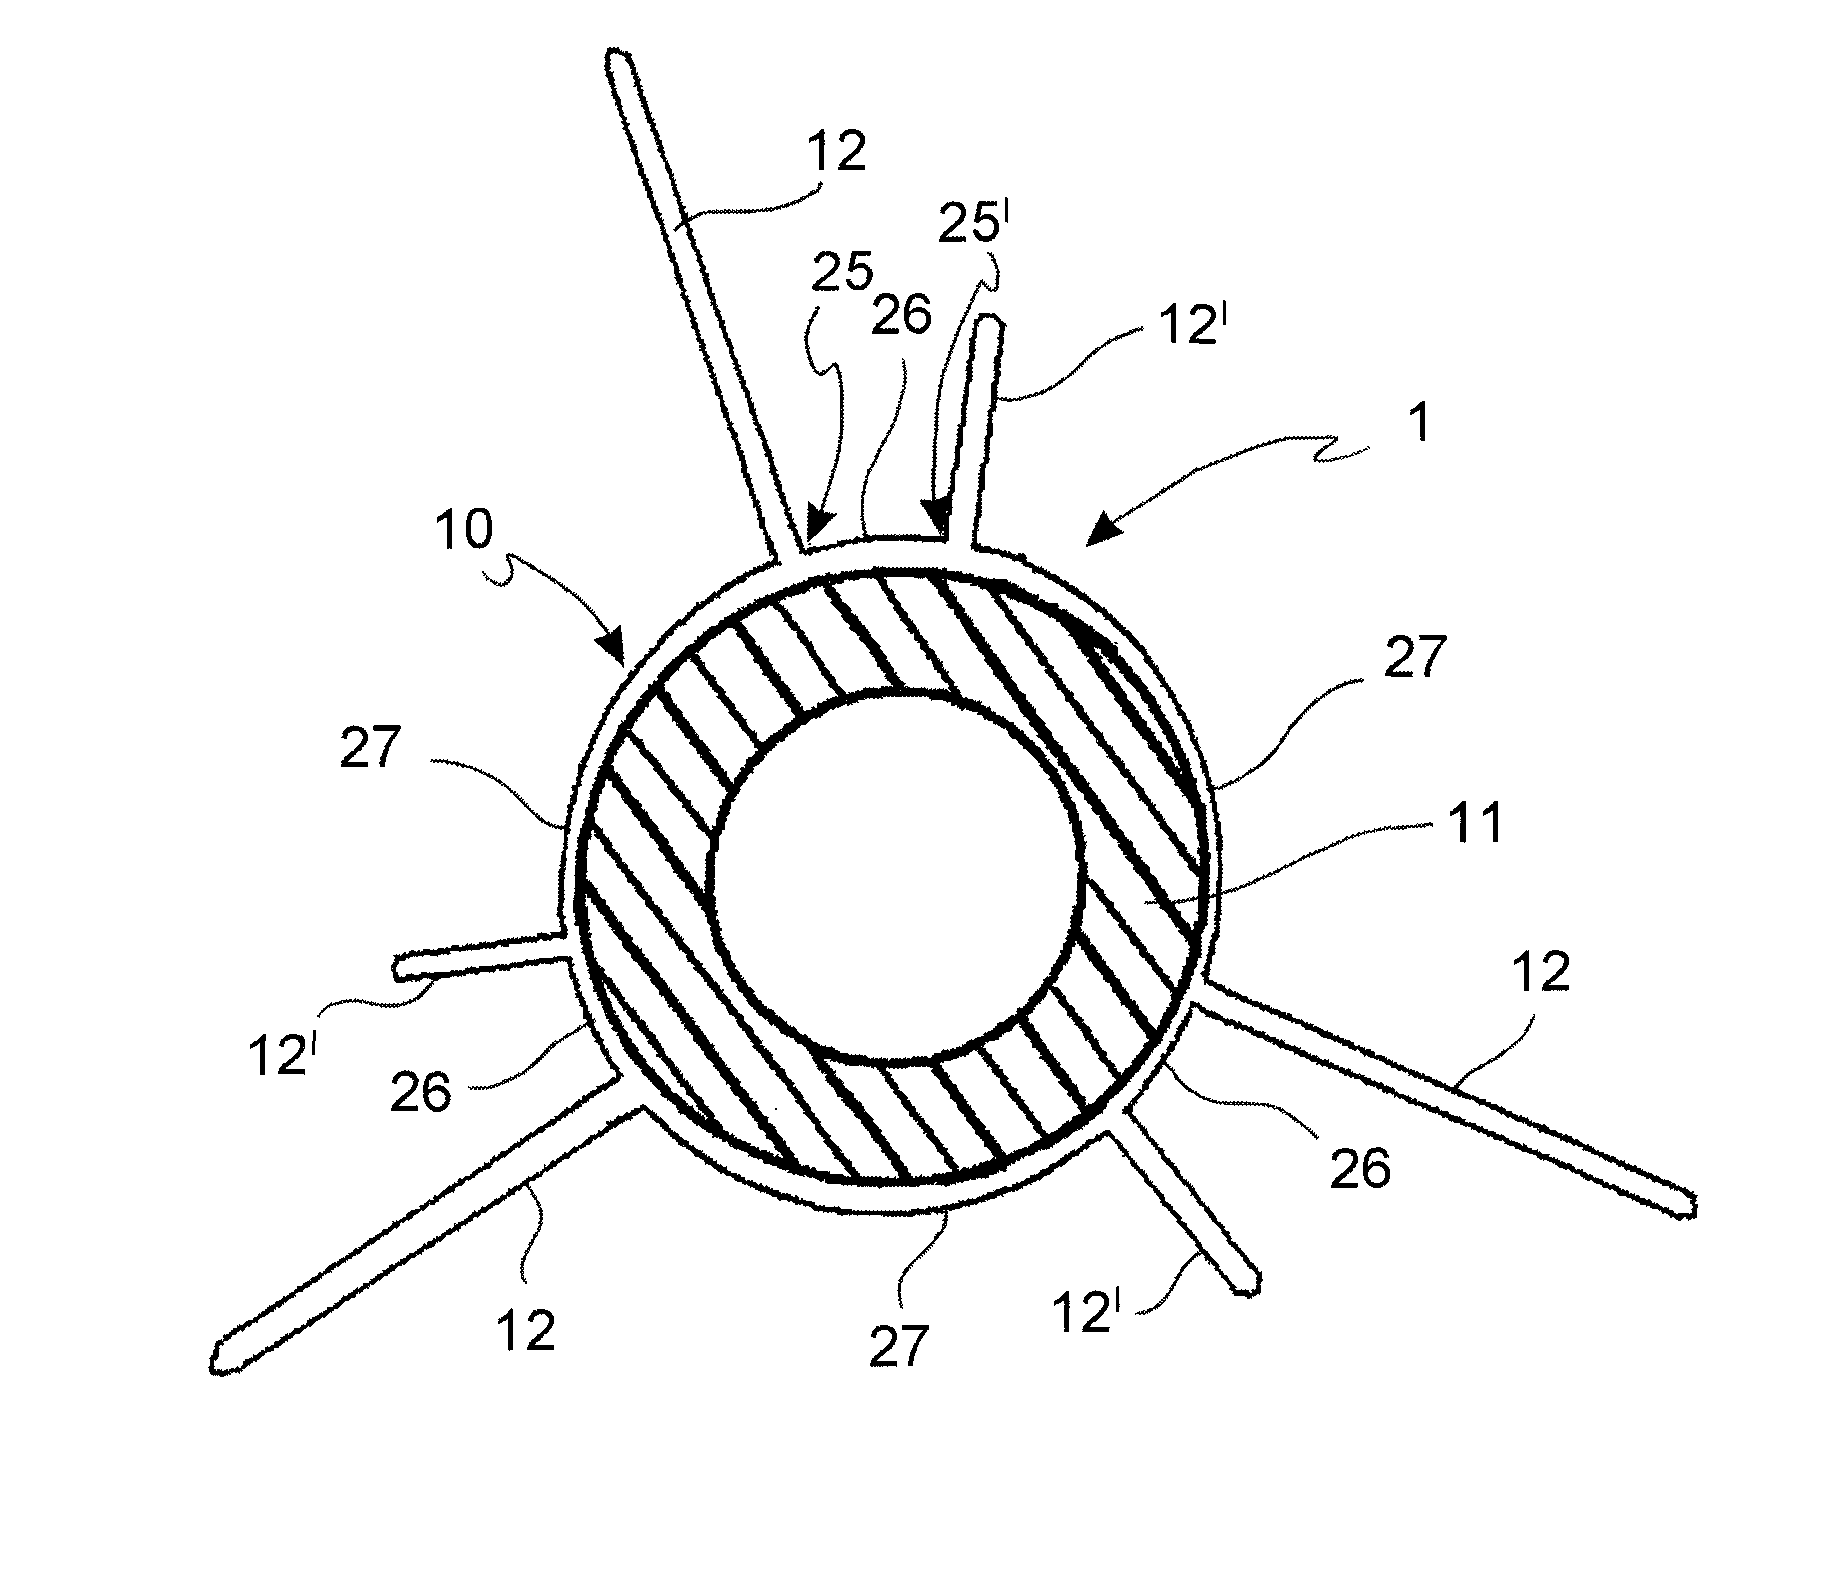 Drug eluting balloon for the treatment of stenosis and method of manufacturing the balloon